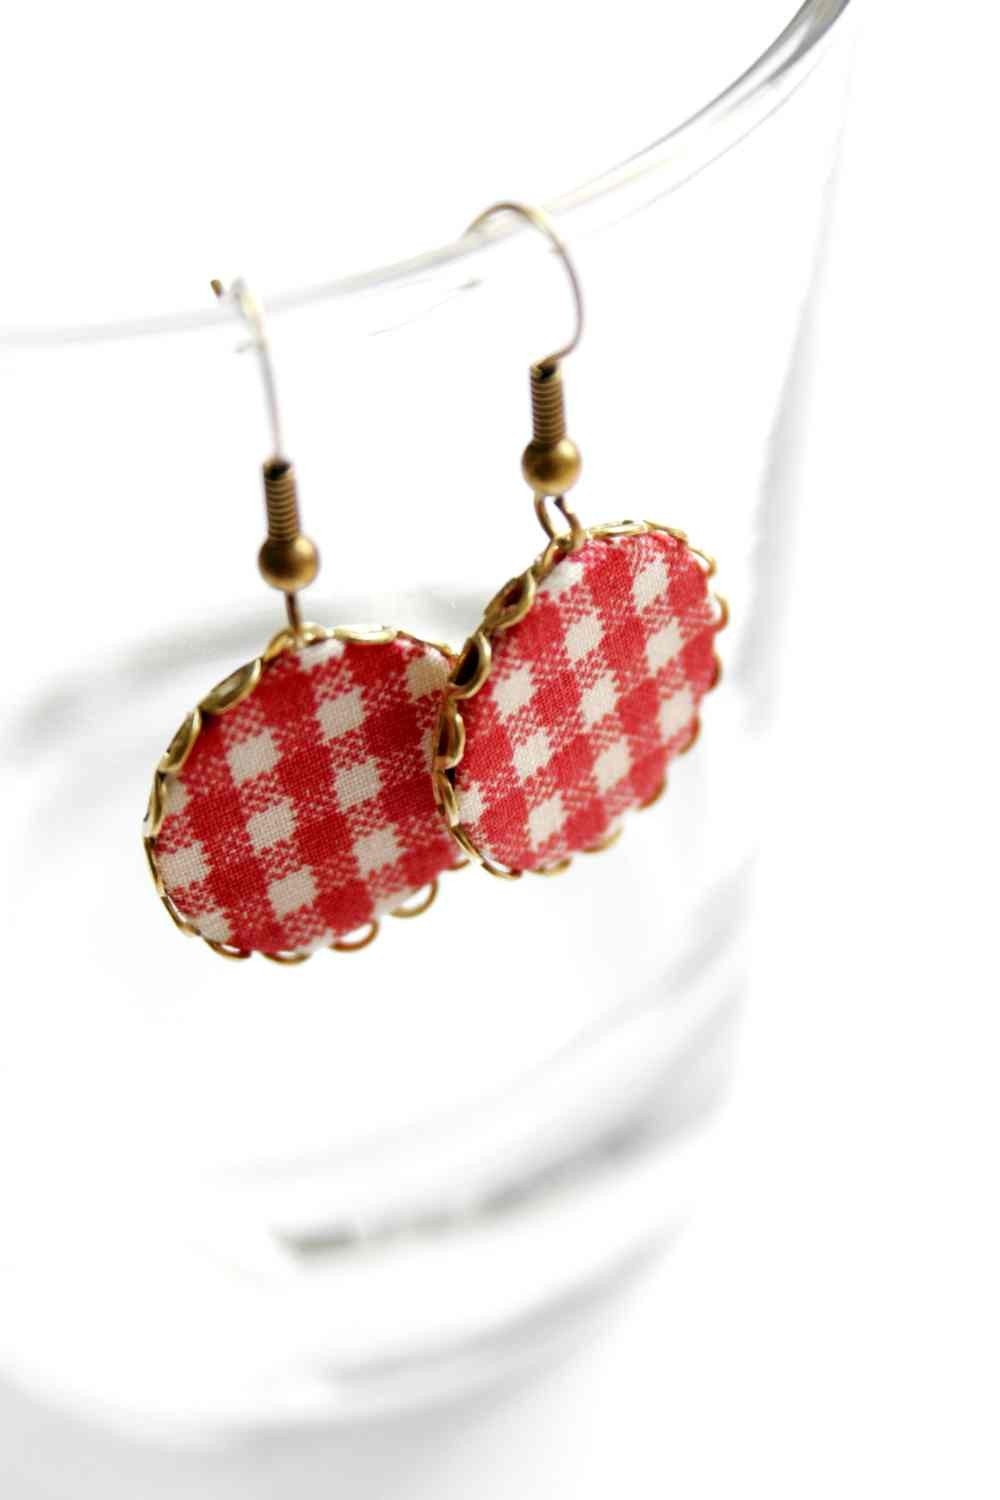 Picnic -
                                    textile jewellery - earrings made of brass filigree and fabric